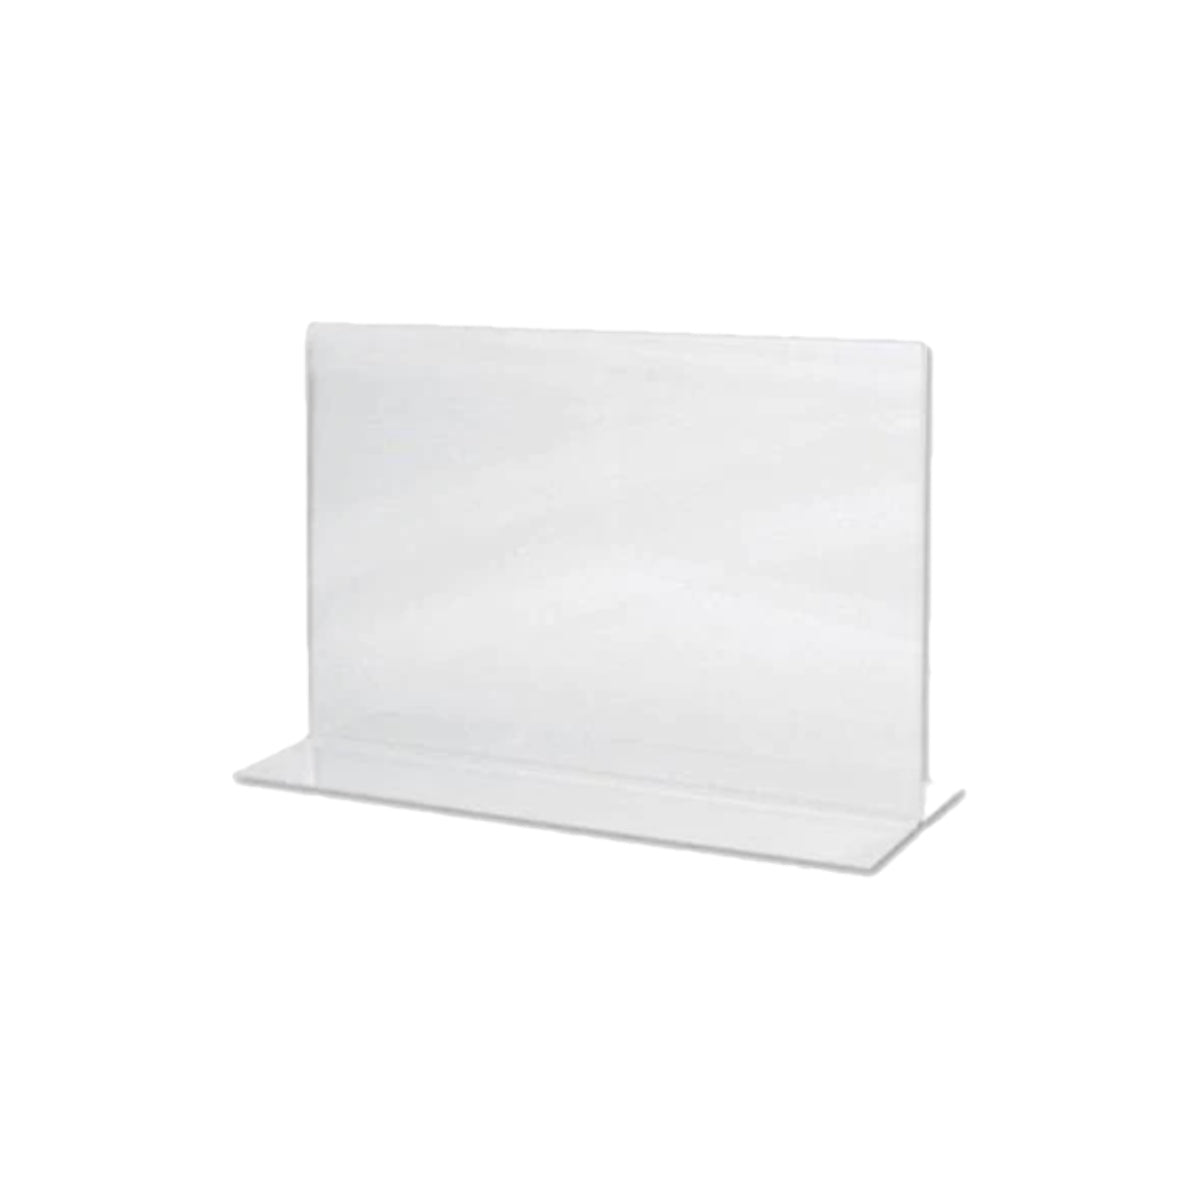 Acrylic Sign Holder 2 Sided T-Type, A5 Landscape, 210 x 149 mm